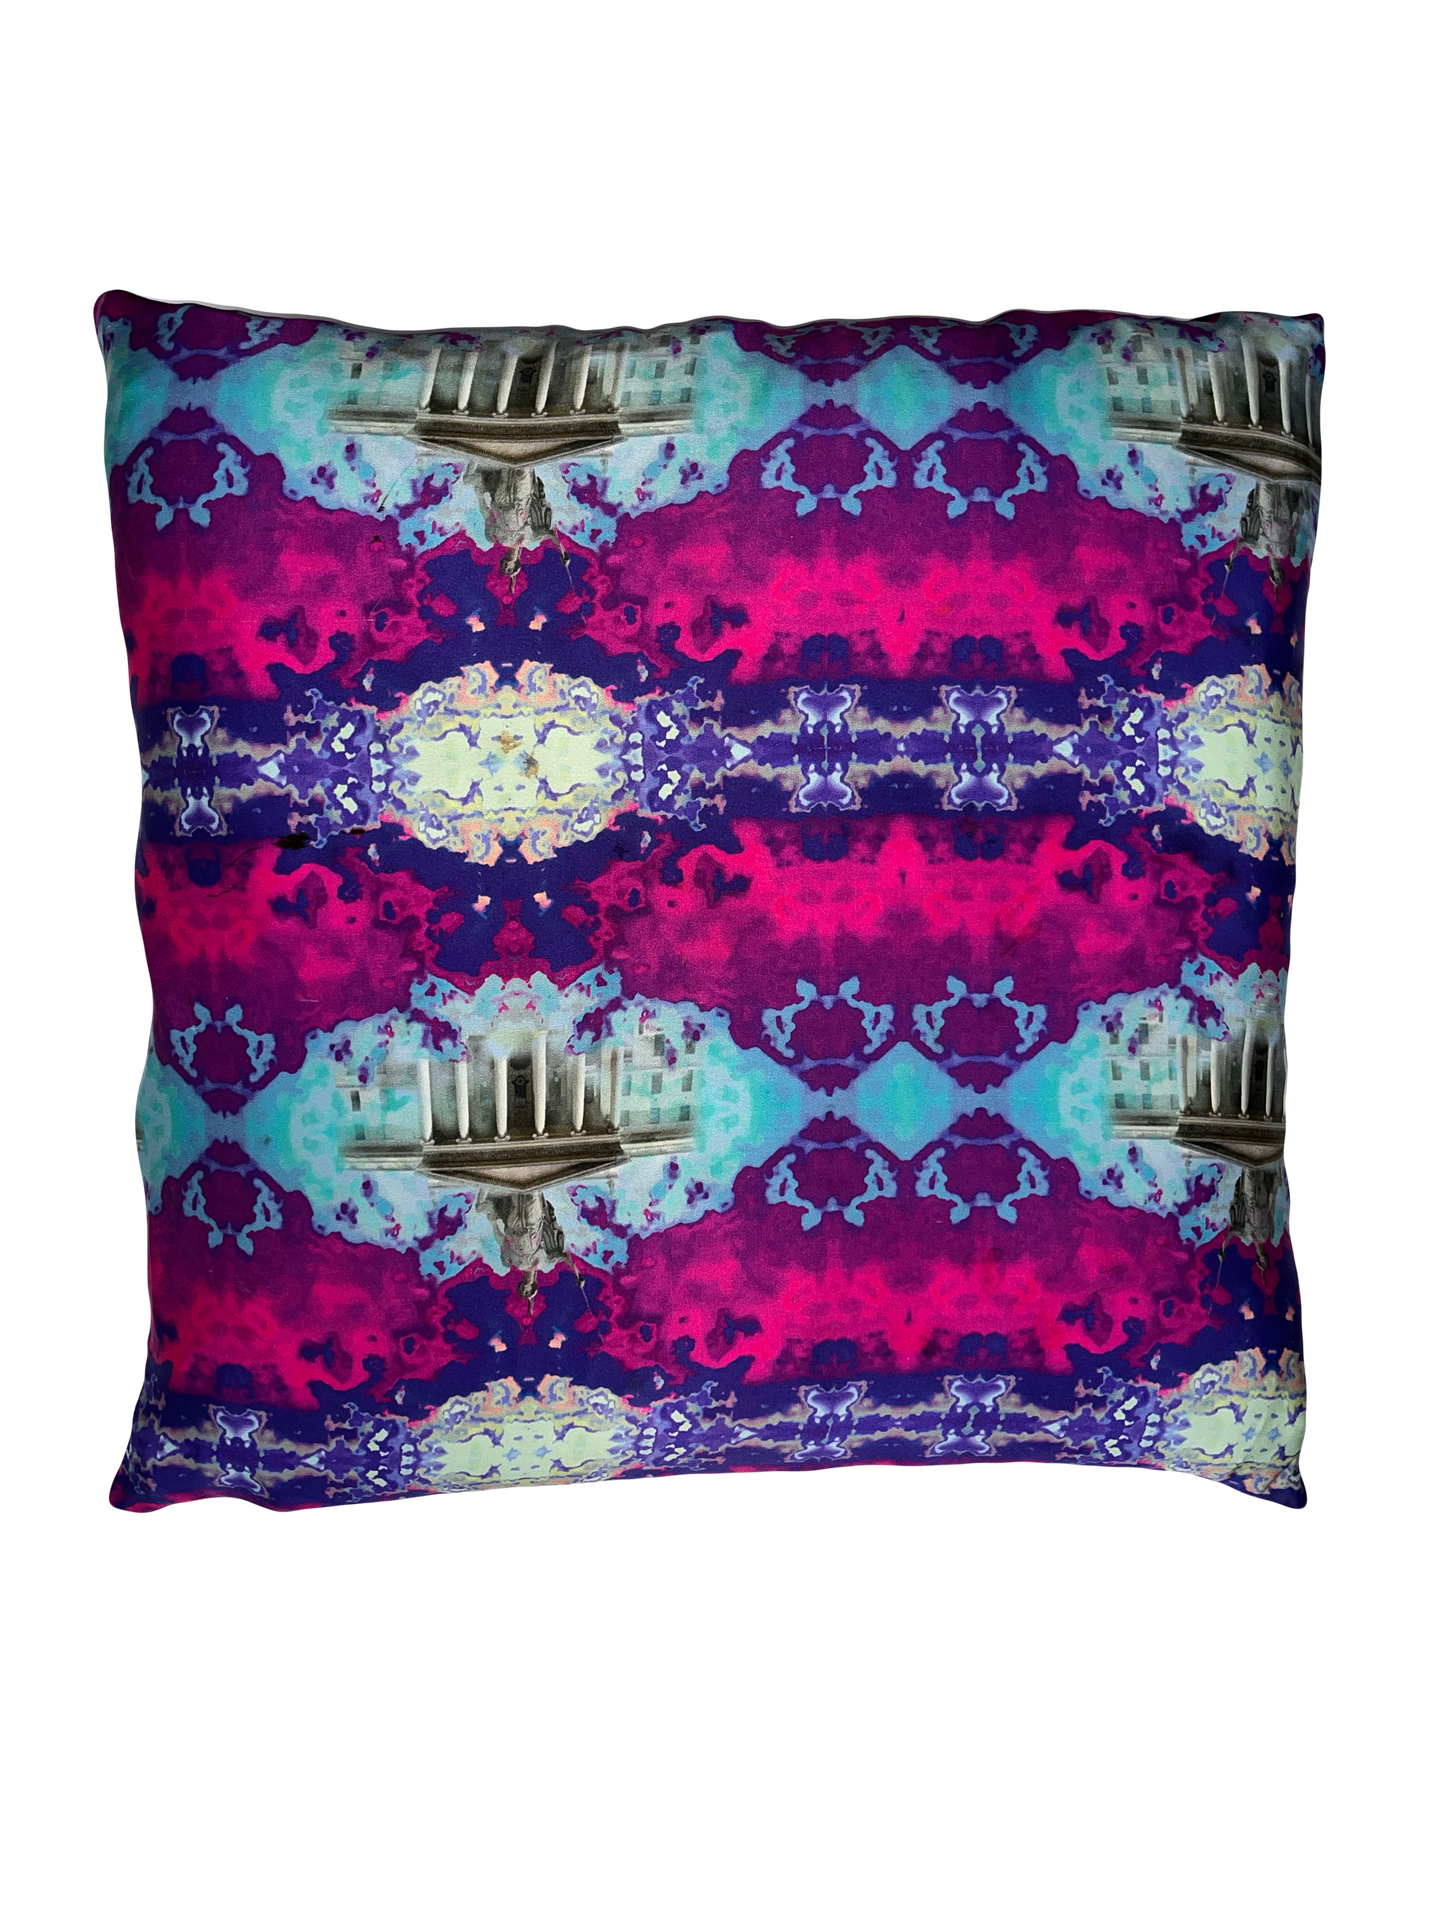 GPO Commerative Cushion (made to order)